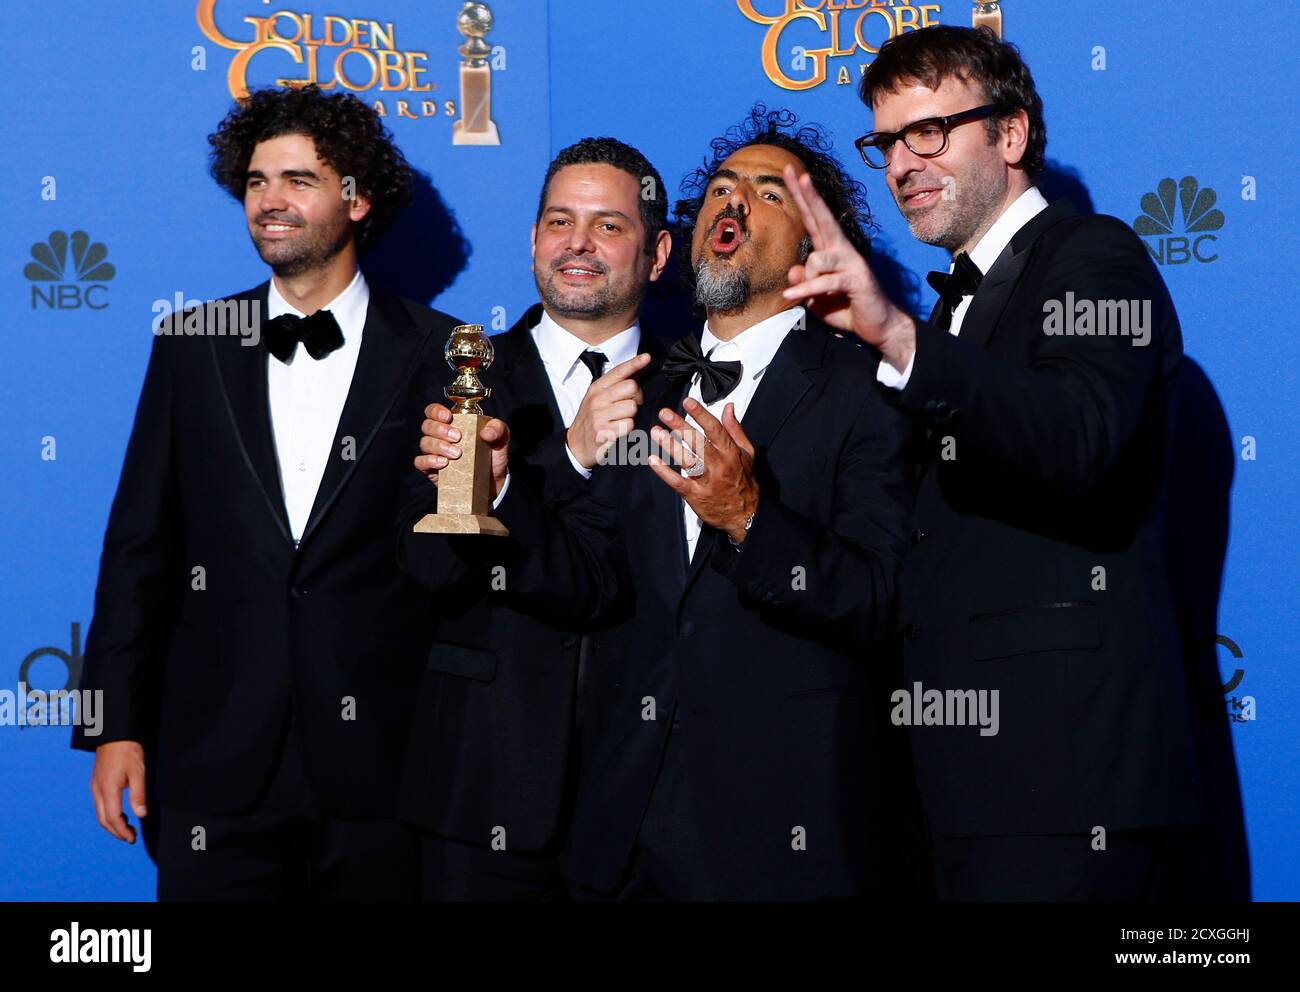 Armando Bo (L), Alexander Dinelaris, Jr., director Alejandro Gonzalez  Inarritu and Nicolas Giacobone (R) pose with their award for Best  Screenplay - Motion Picture for their film "Birdman" backstage at the 72nd